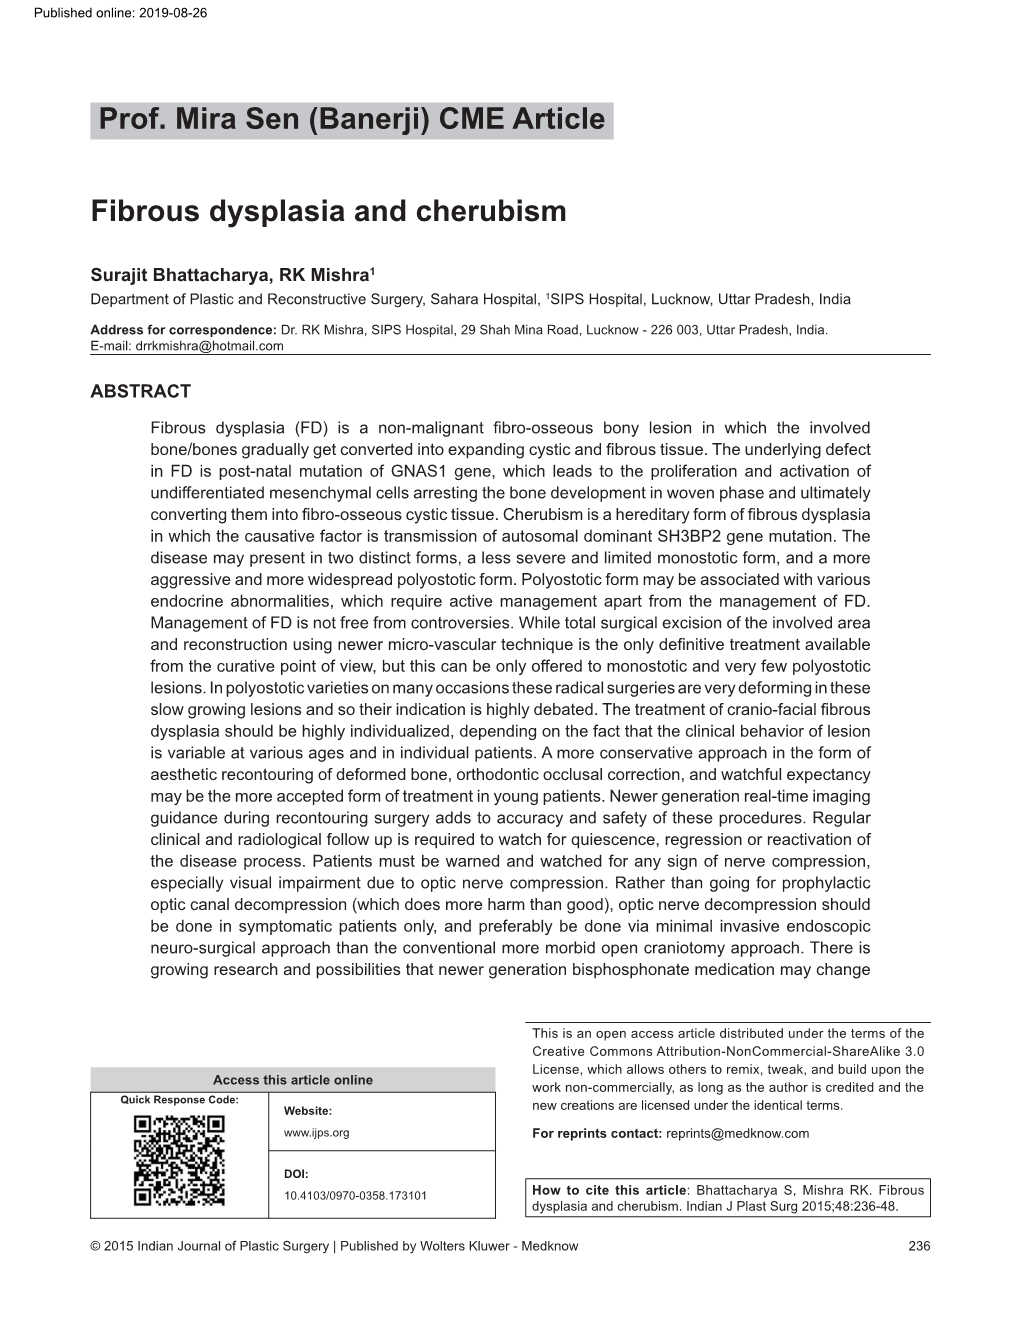 CME Article Fibrous Dysplasia and Cherubism